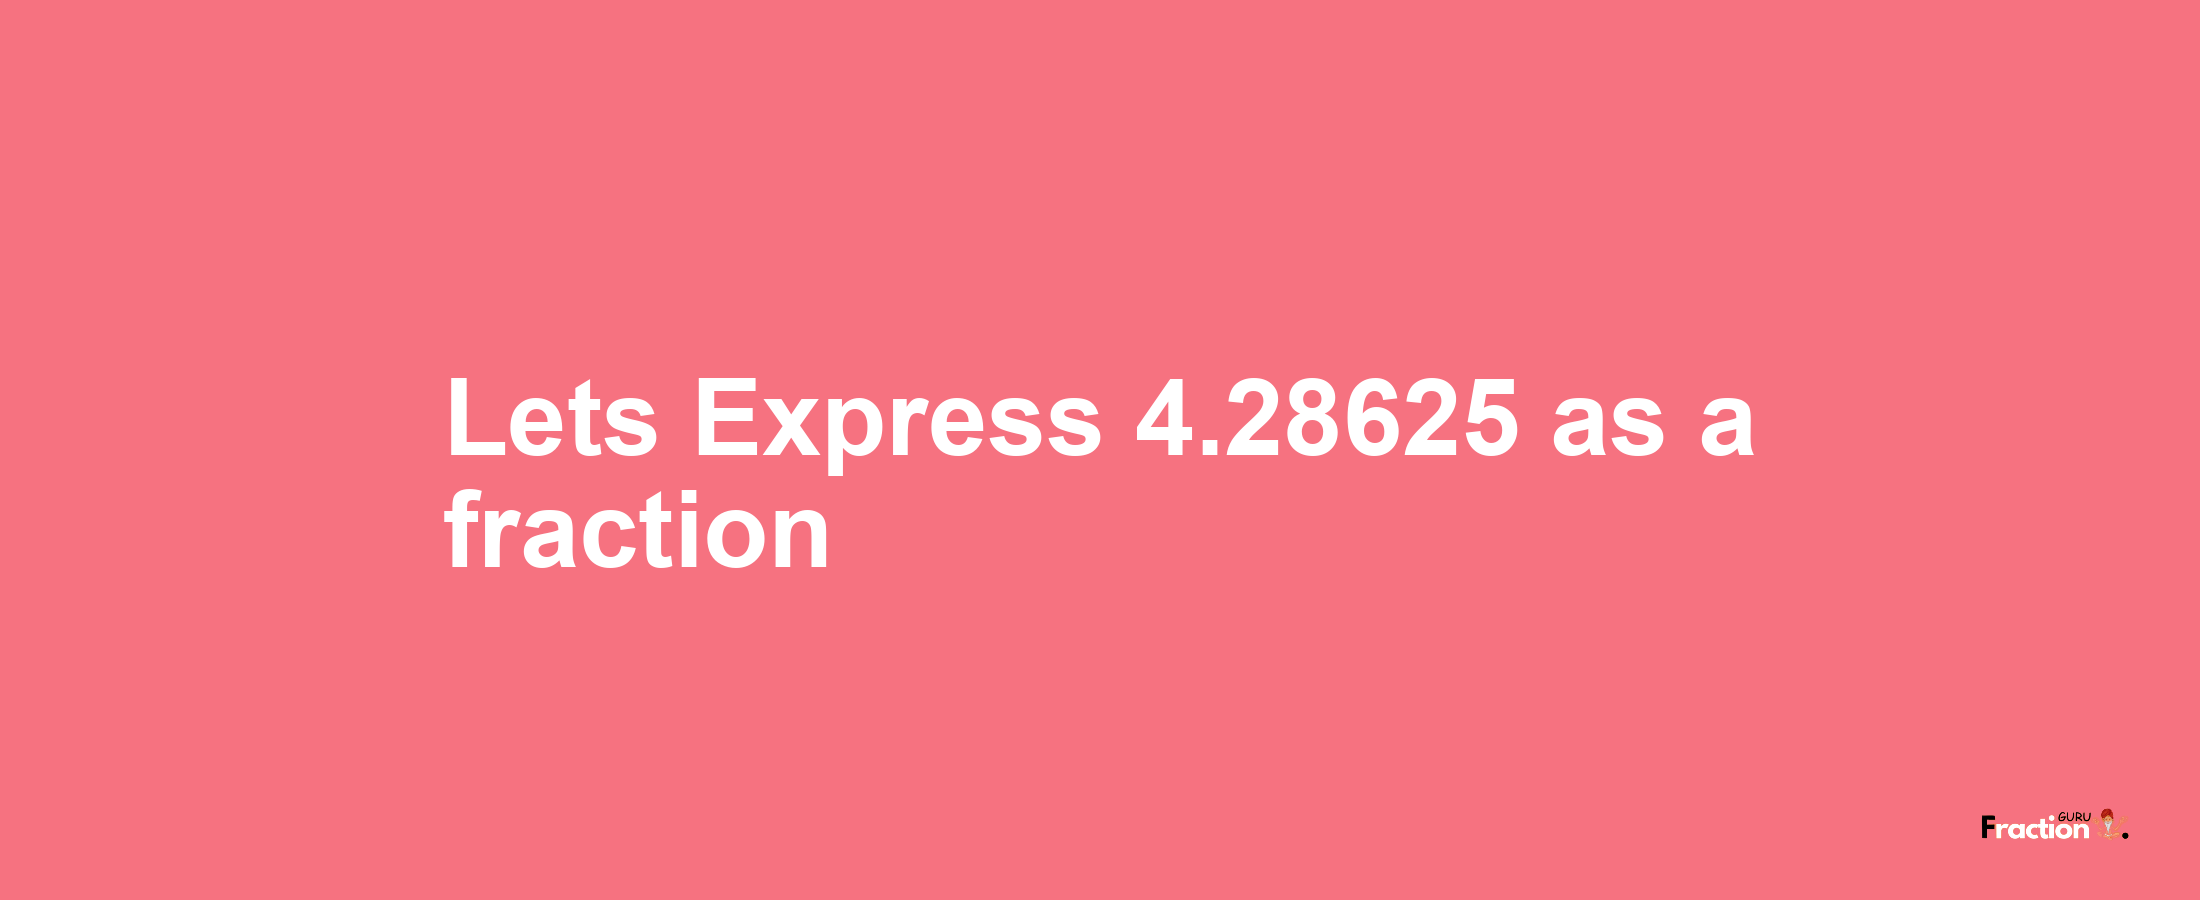 Lets Express 4.28625 as afraction